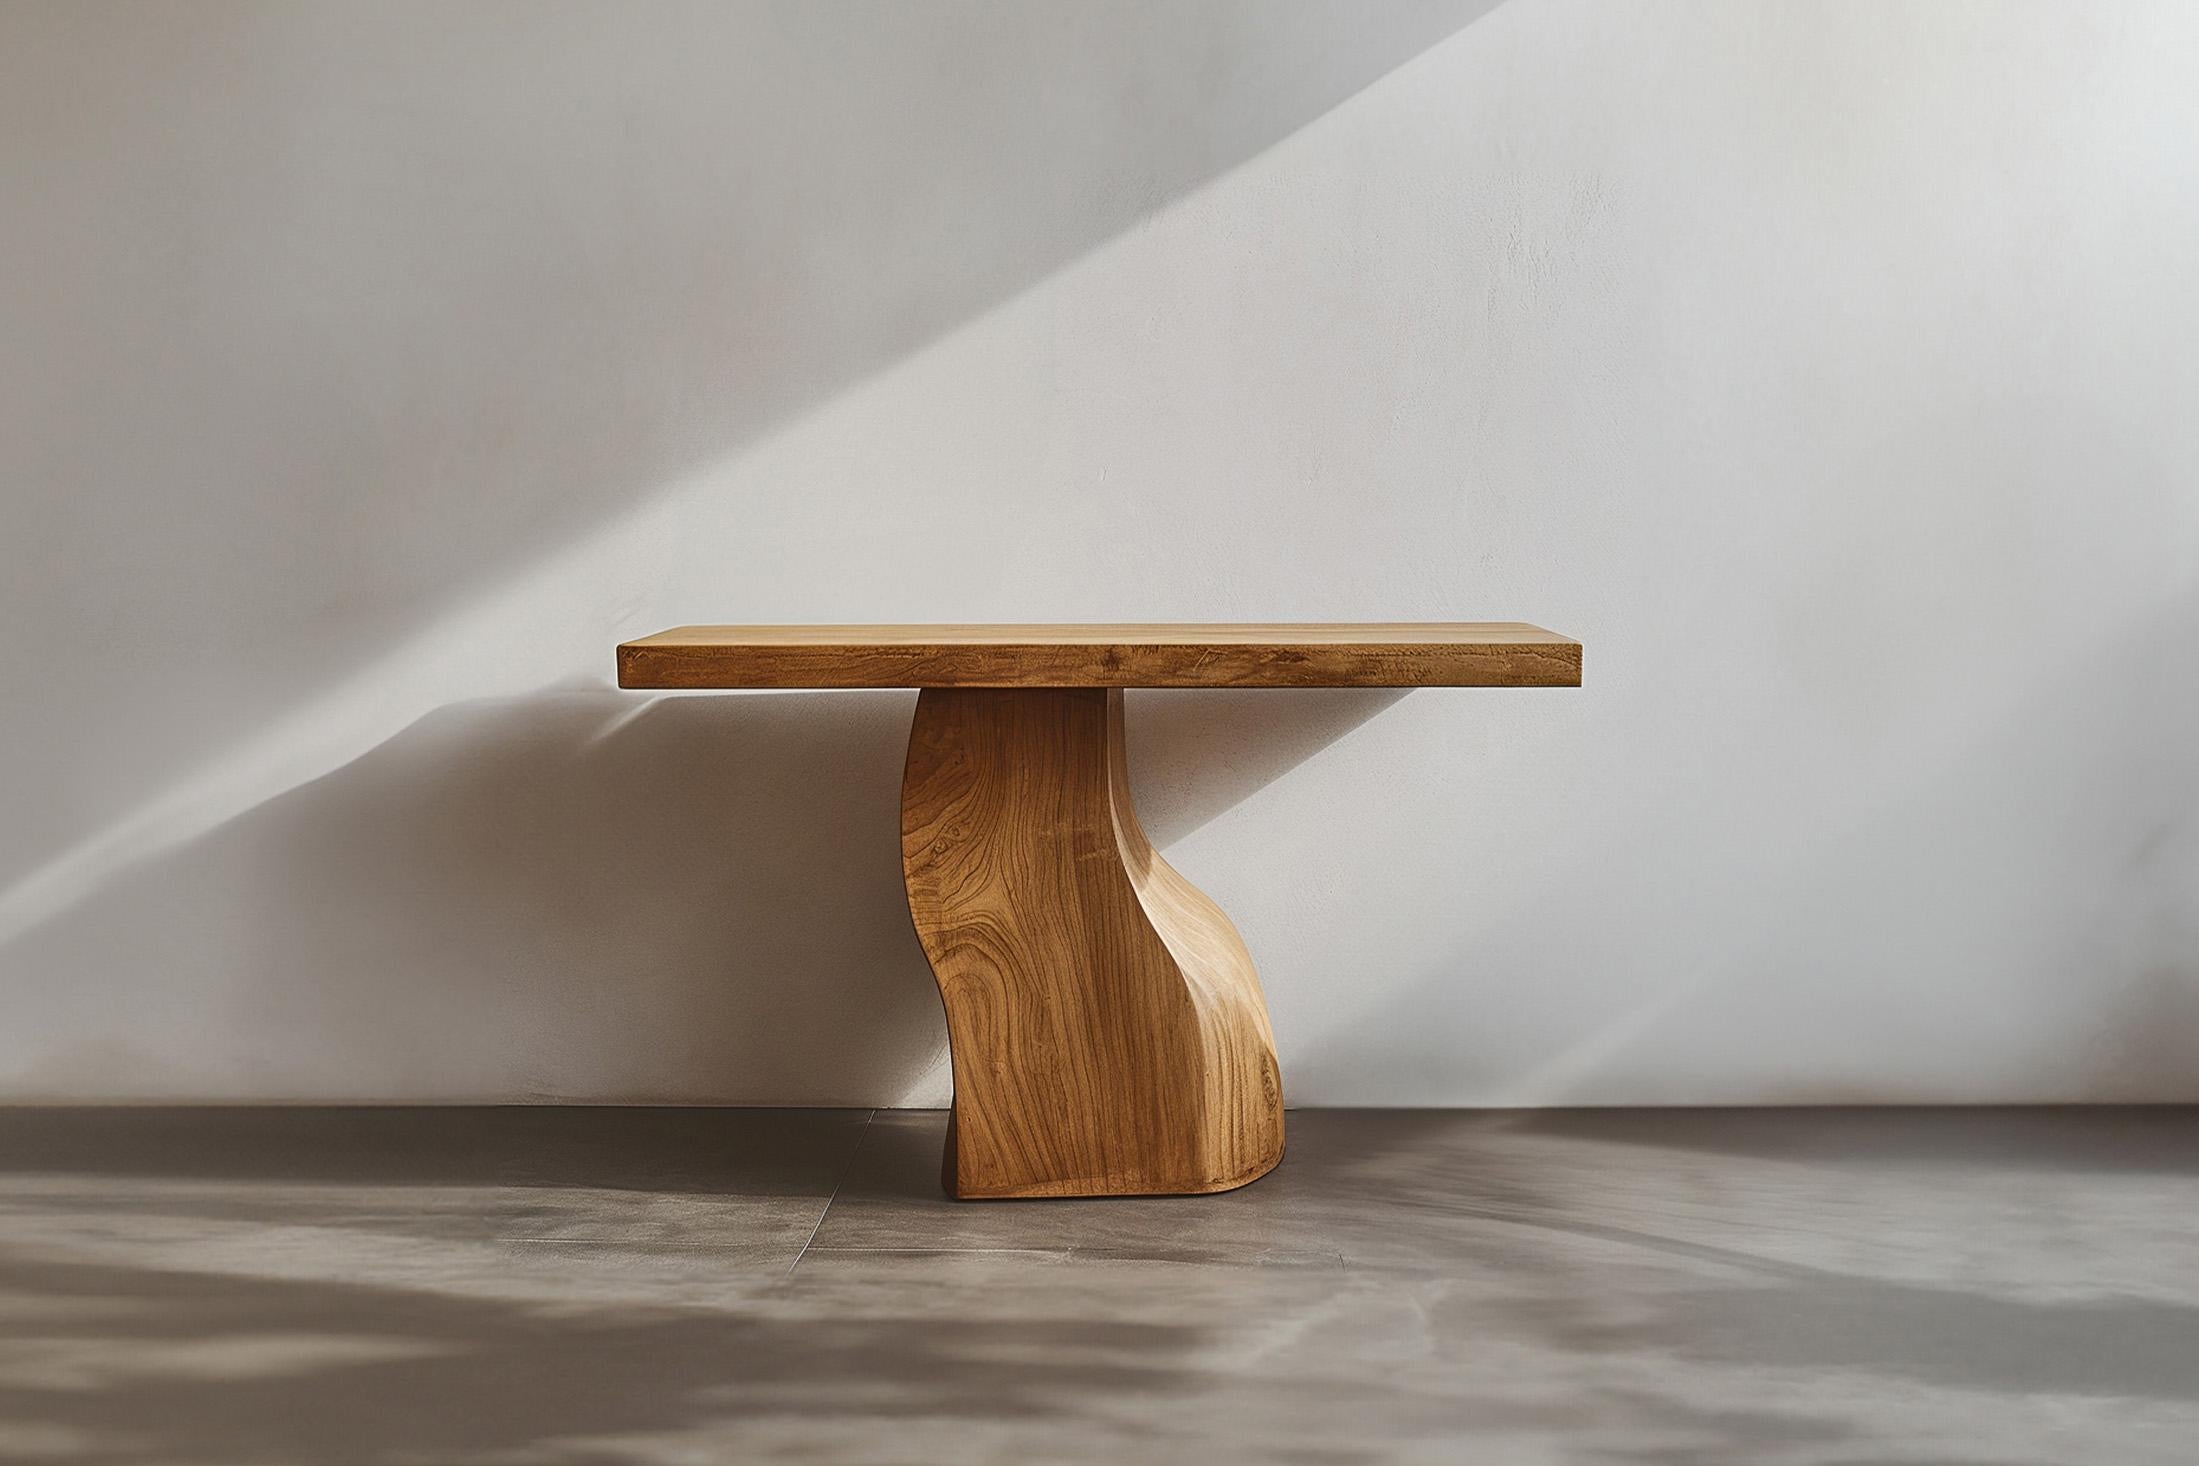 Elefante by NONO Console 20, Slender Oak Elegance, Substantial Presence—————————————————————
Elefante Collection: A Harmony of Design and Heritage by NONO

Crafting Elegance with a Modernist Touch

NONO, renowned for its decade-long journey in